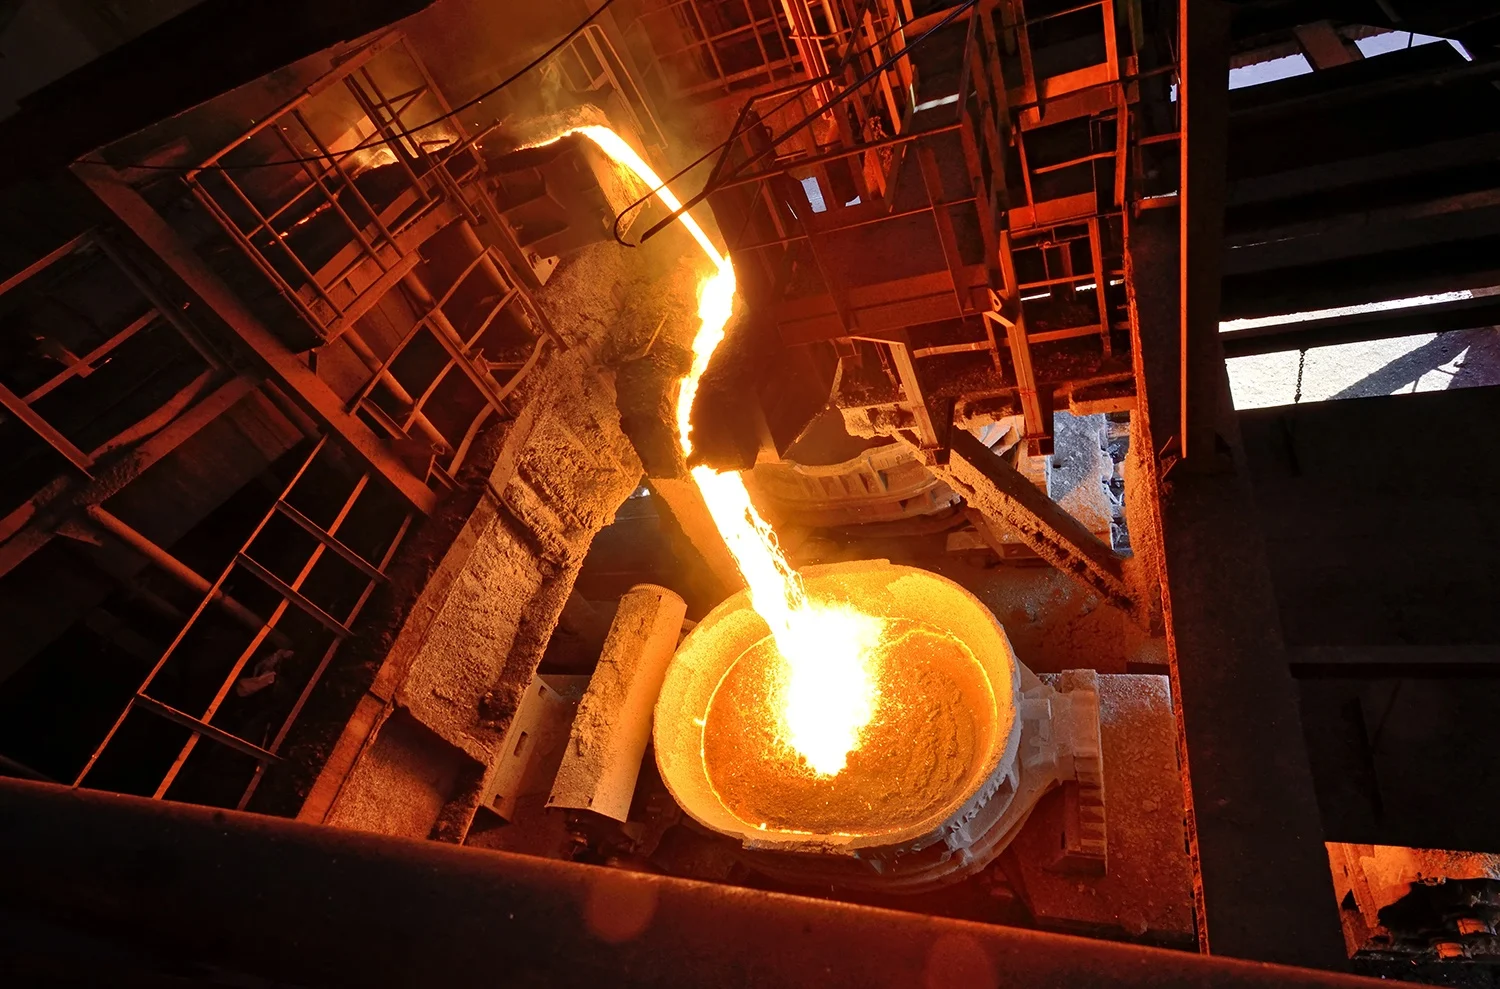 What should we pay attention to during the manufacturing process of high-temperature alloys?